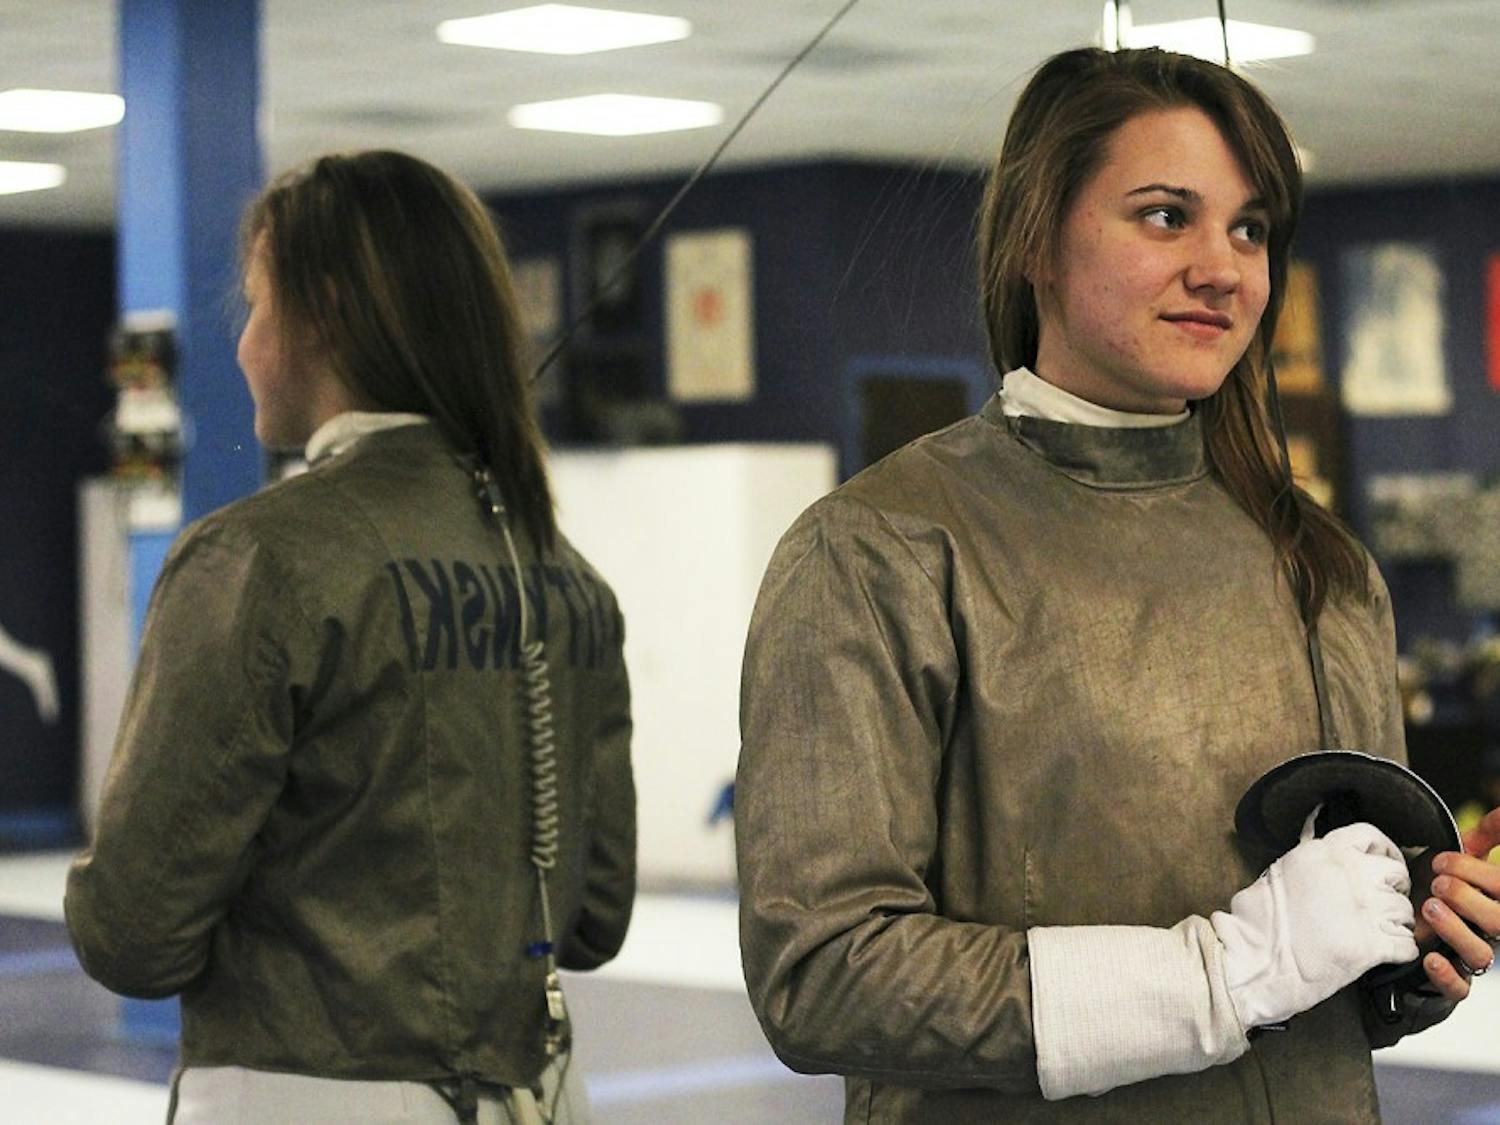 Gillian Litynski, a sophomore from New York, is one of four Tar Heels who qualified for the 2013 NCAA Fencing Championship. Litynski will compete in women's saber in San Antonio, Texas this weekend. This is her second appearance at the championship.